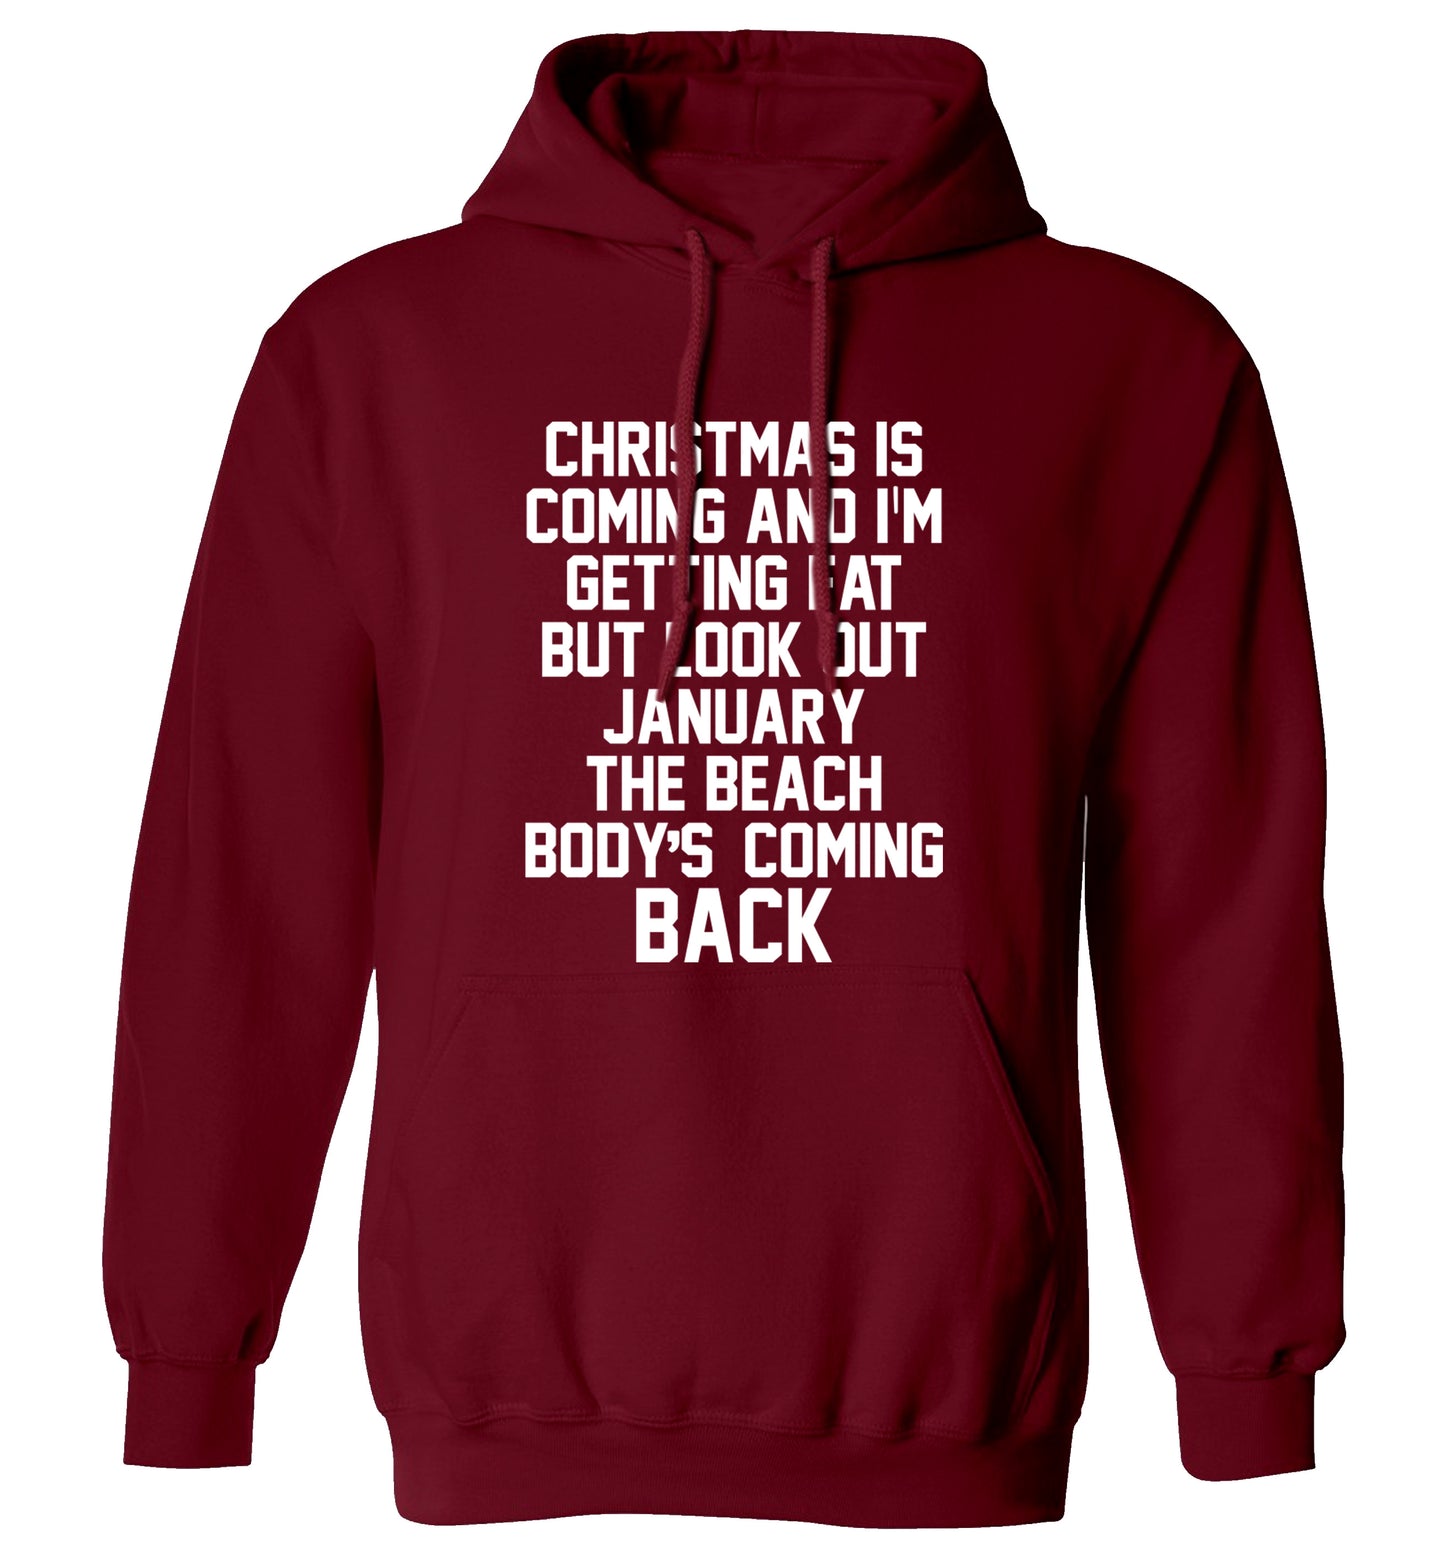 Christmas is coming and I'm getting fat but look out January the beach body's coming back! adults unisex maroon hoodie 2XL